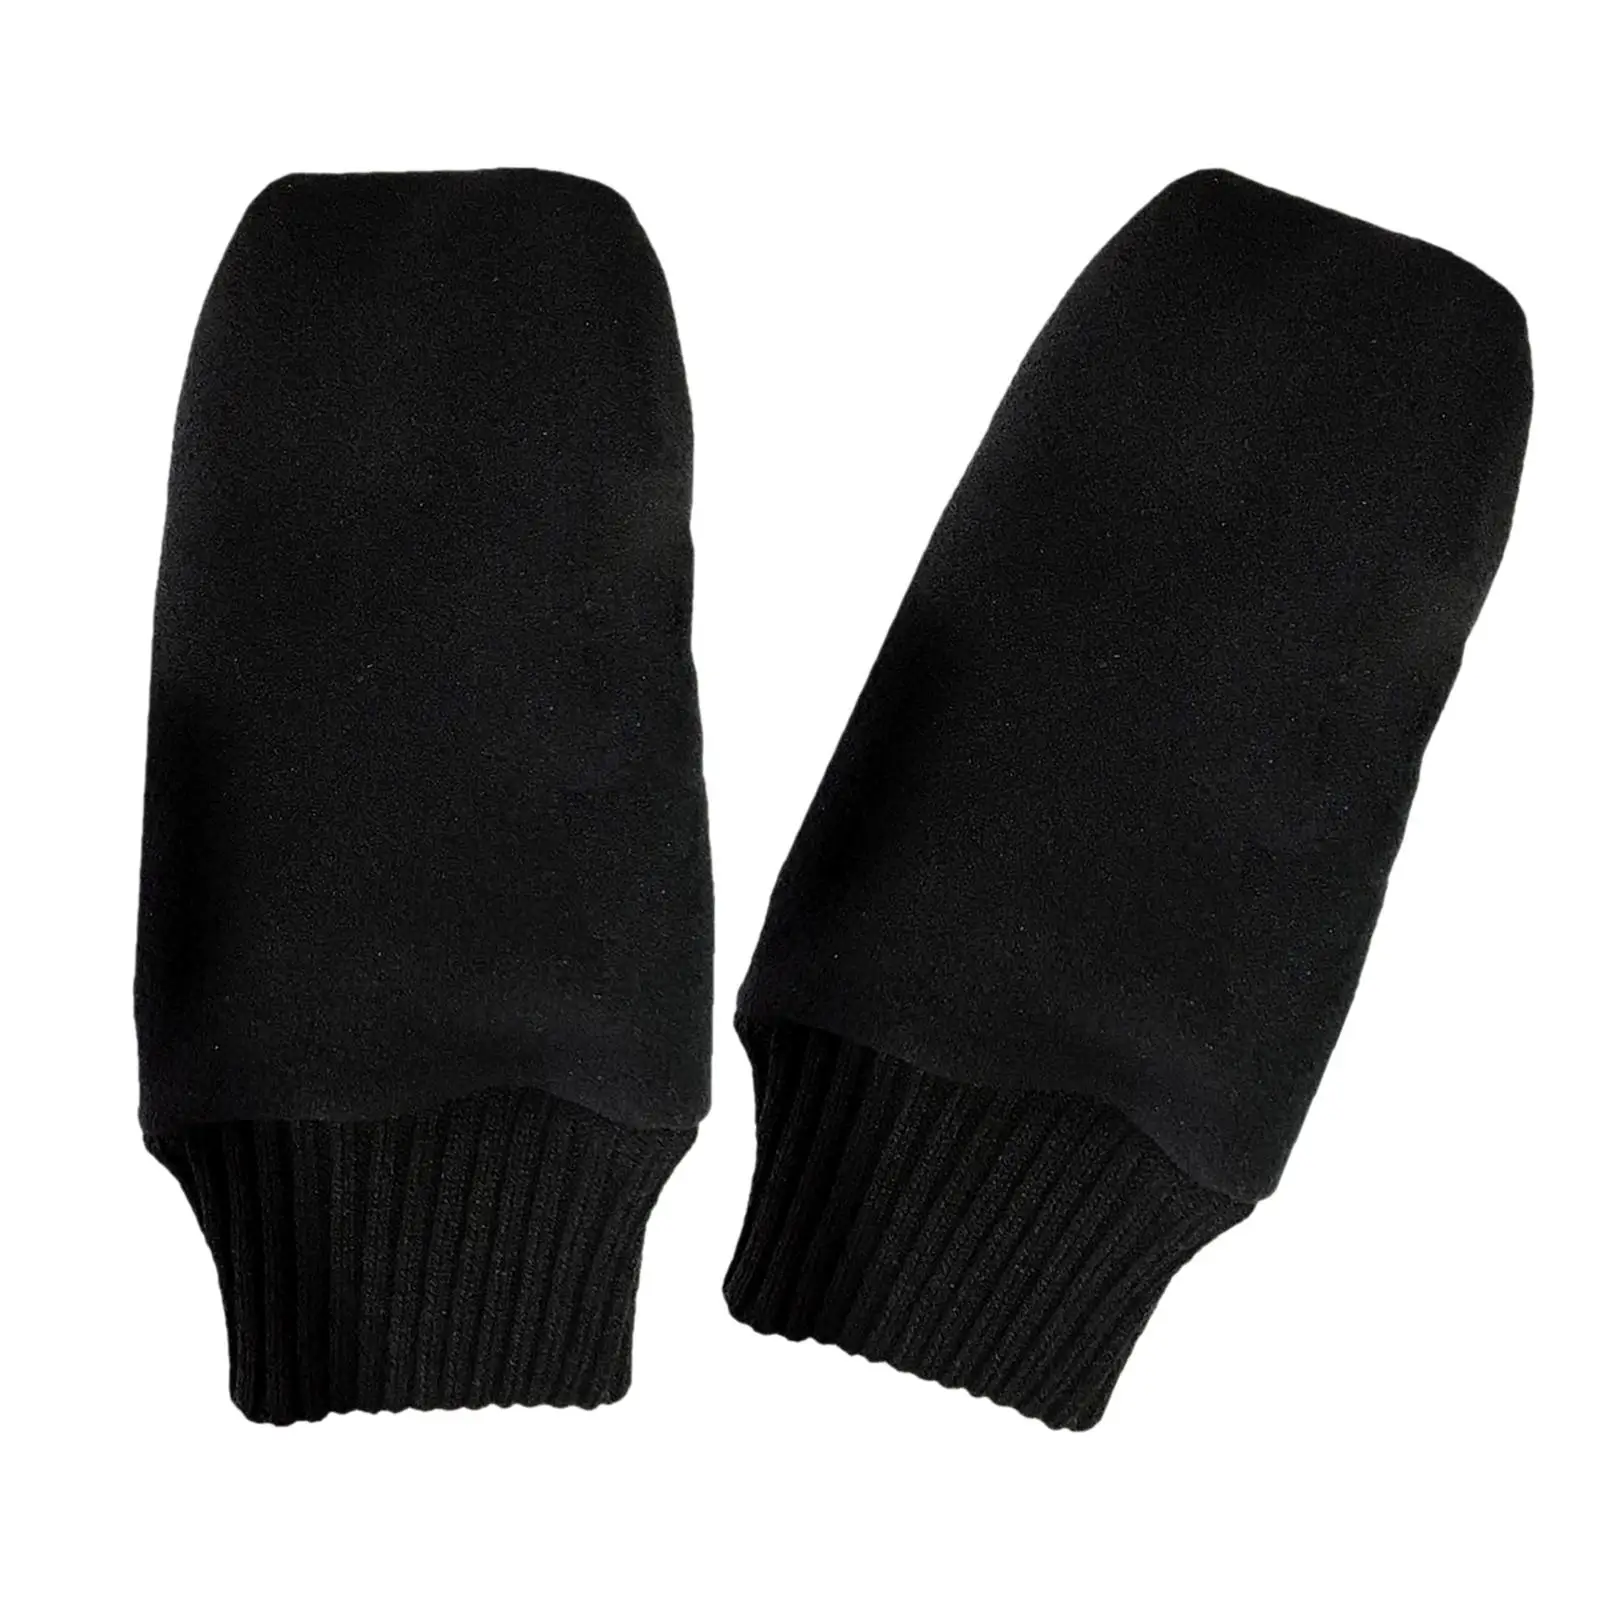 Dual Layer Golf Gloves Golf Equipment Non Slip Breathable Wear Resistant Reliable Pull up for Outdoor Sports Training Golfer Men